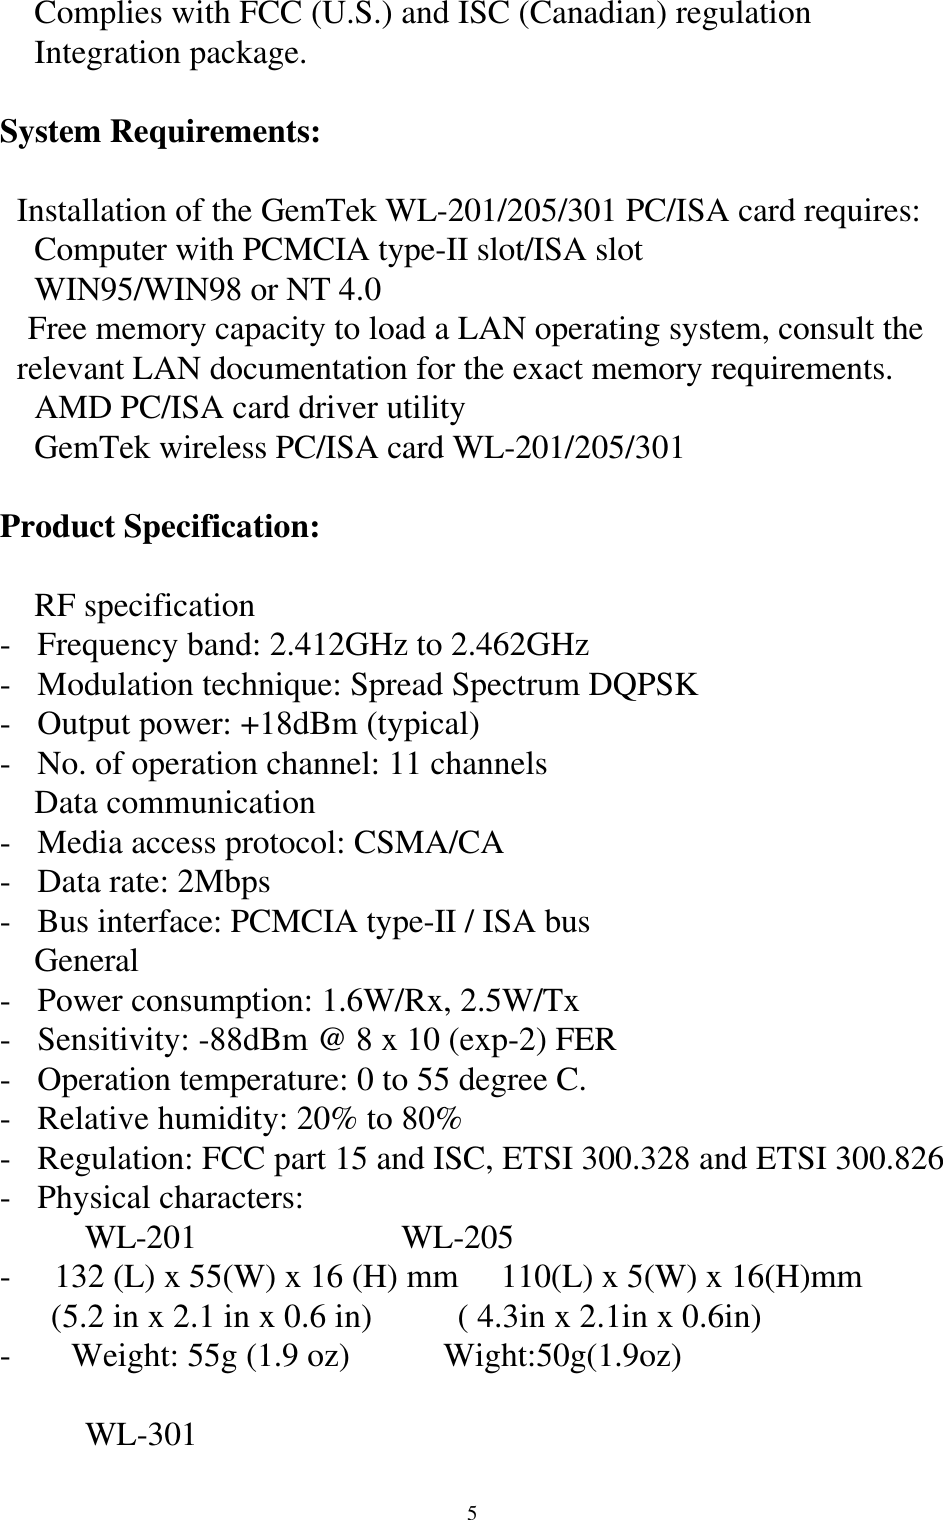 5 Complies with FCC (U.S.) and ISC (Canadian) regulation Integration package.System Requirements:  Installation of the GemTek WL-201/205/301 PC/ISA card requires: Computer with PCMCIA type-II slot/ISA slot WIN95/WIN98 or NT 4.0 Free memory capacity to load a LAN operating system, consult the     relevant LAN documentation for the exact memory requirements. AMD PC/ISA card driver utility GemTek wireless PC/ISA card WL-201/205/301Product Specification: RF specification- Frequency band: 2.412GHz to 2.462GHz- Modulation technique: Spread Spectrum DQPSK- Output power: +18dBm (typical)- No. of operation channel: 11 channels Data communication- Media access protocol: CSMA/CA- Data rate: 2Mbps- Bus interface: PCMCIA type-II / ISA bus General- Power consumption: 1.6W/Rx, 2.5W/Tx- Sensitivity: -88dBm @ 8 x 10 (exp-2) FER- Operation temperature: 0 to 55 degree C.- Relative humidity: 20% to 80%- Regulation: FCC part 15 and ISC, ETSI 300.328 and ETSI 300.826- Physical characters:          WL-201                        WL-205-   132 (L) x 55(W) x 16 (H) mm     110(L) x 5(W) x 16(H)mm      (5.2 in x 2.1 in x 0.6 in)          ( 4.3in x 2.1in x 0.6in)-     Weight: 55g (1.9 oz)           Wight:50g(1.9oz)          WL-301